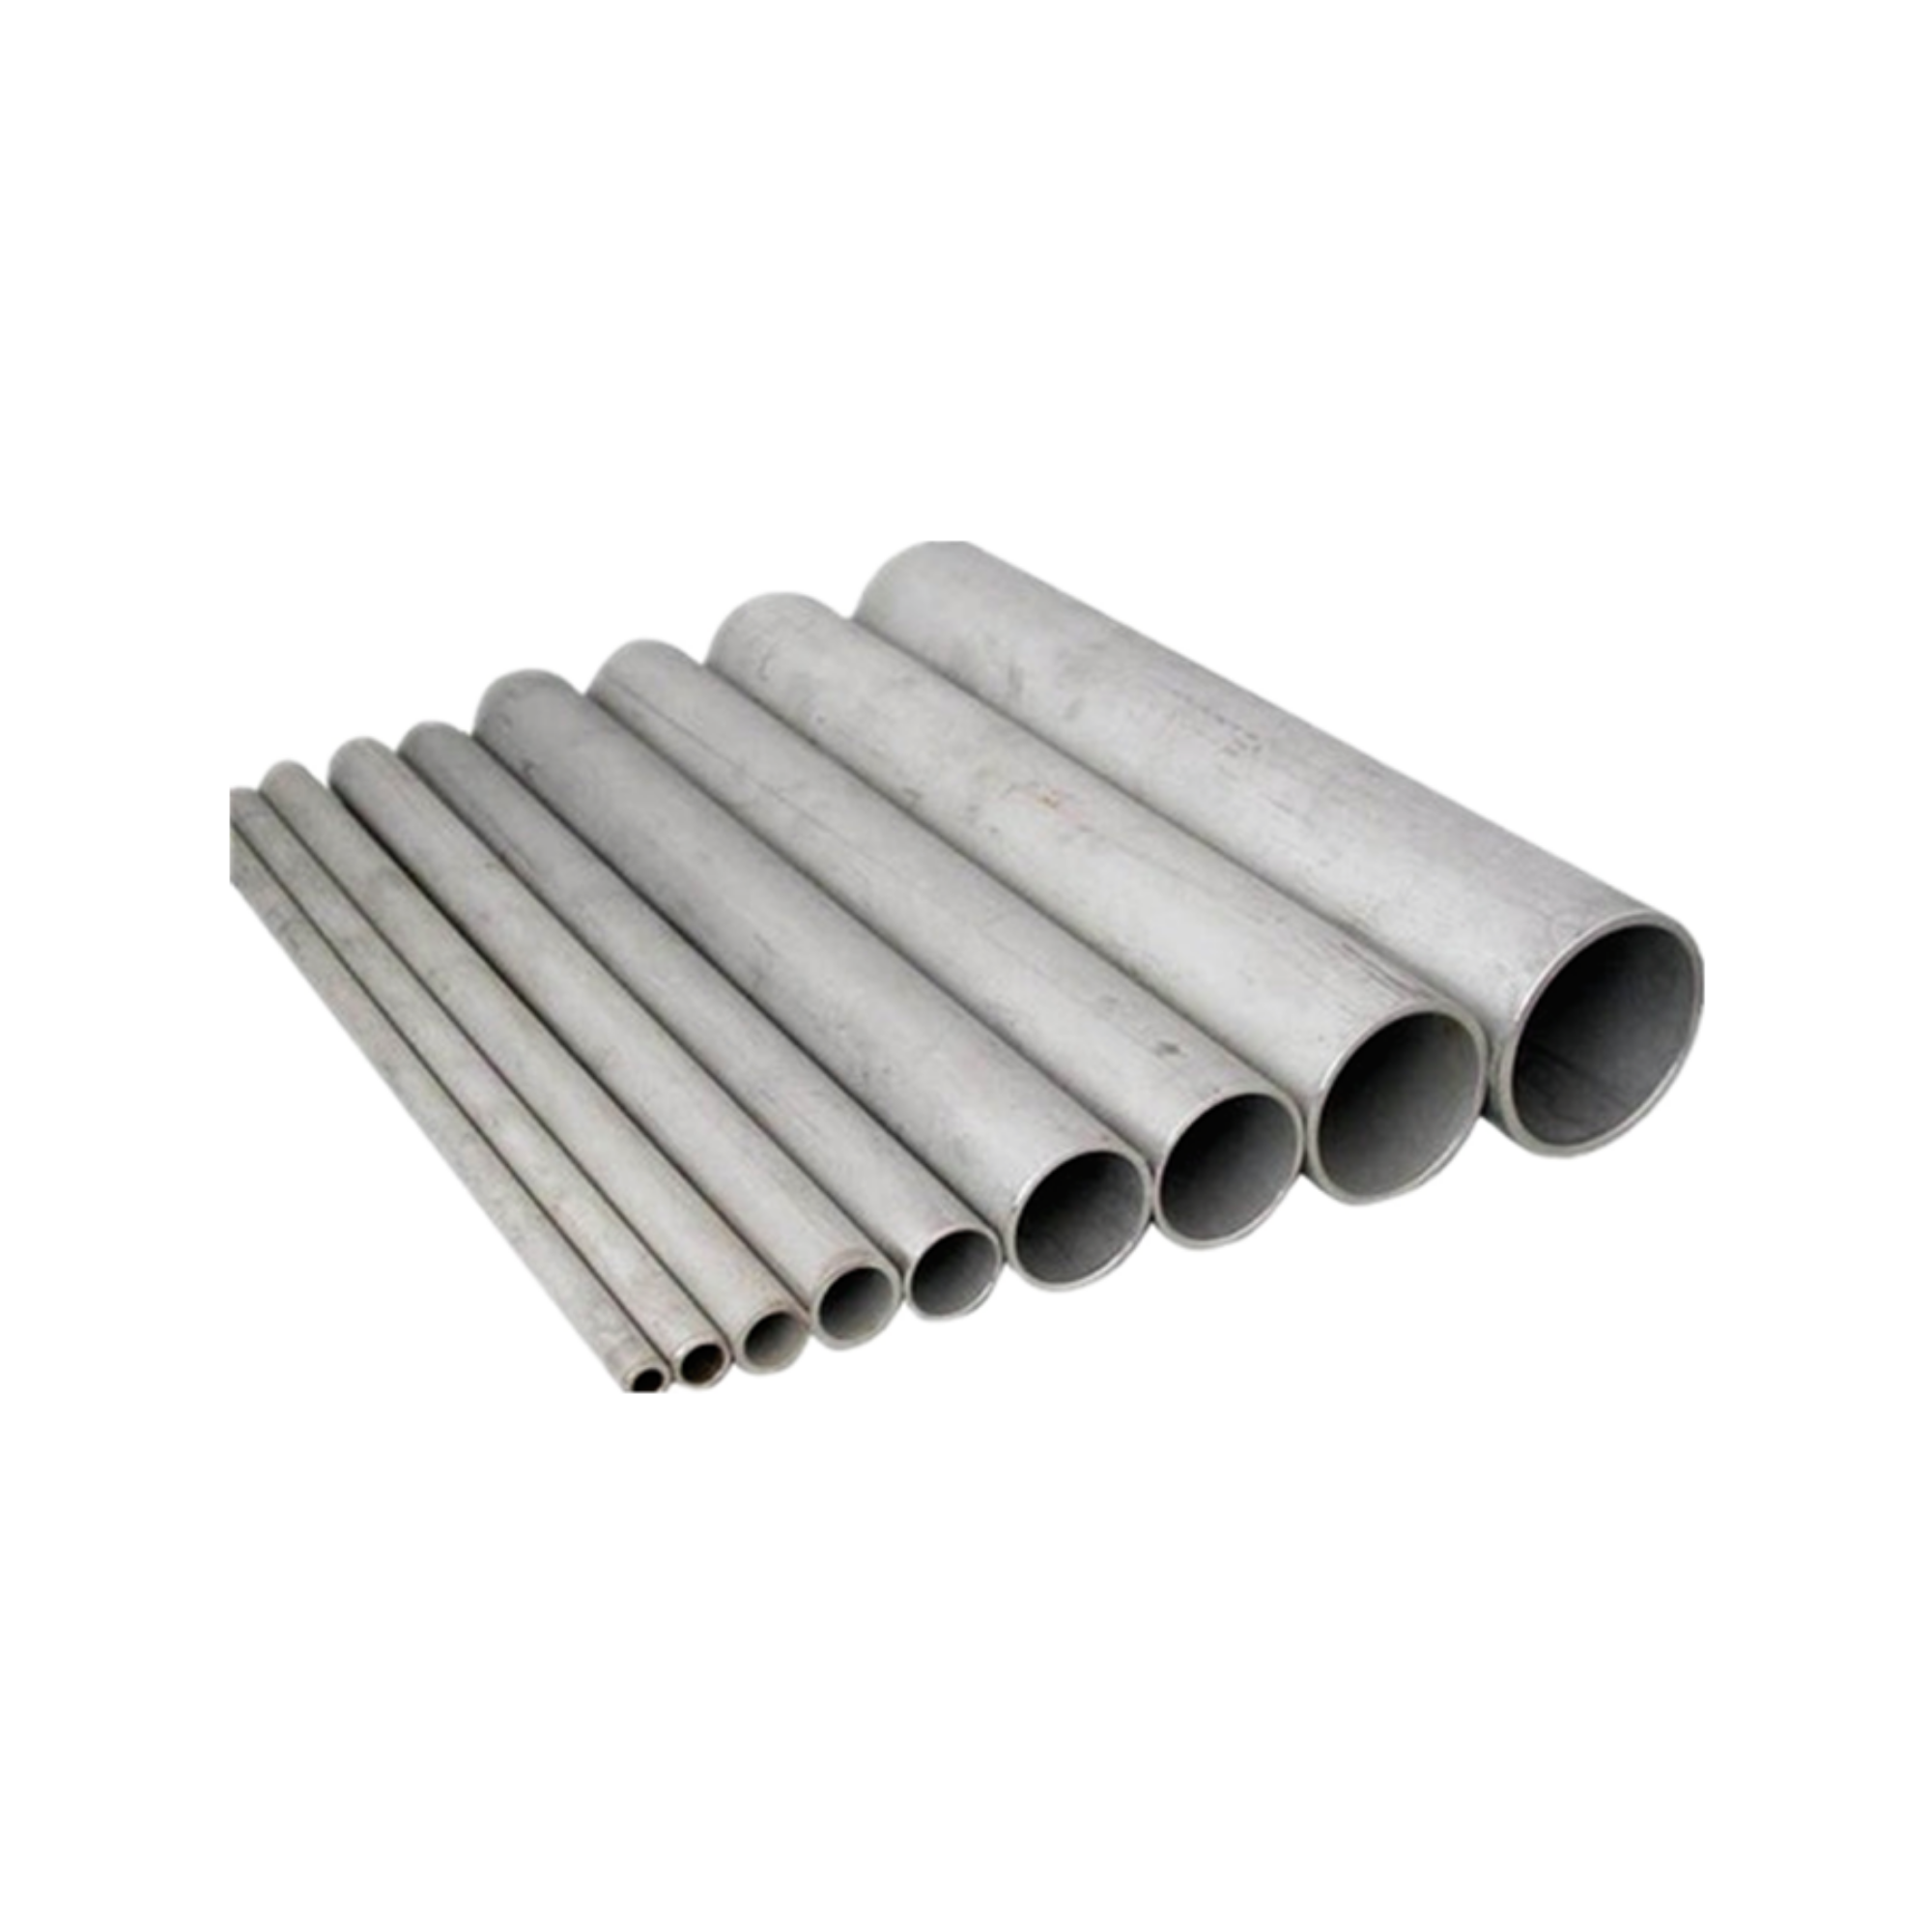 Hot rolled 15mm 25mm 30mm diameter 904l stainless steel pipe